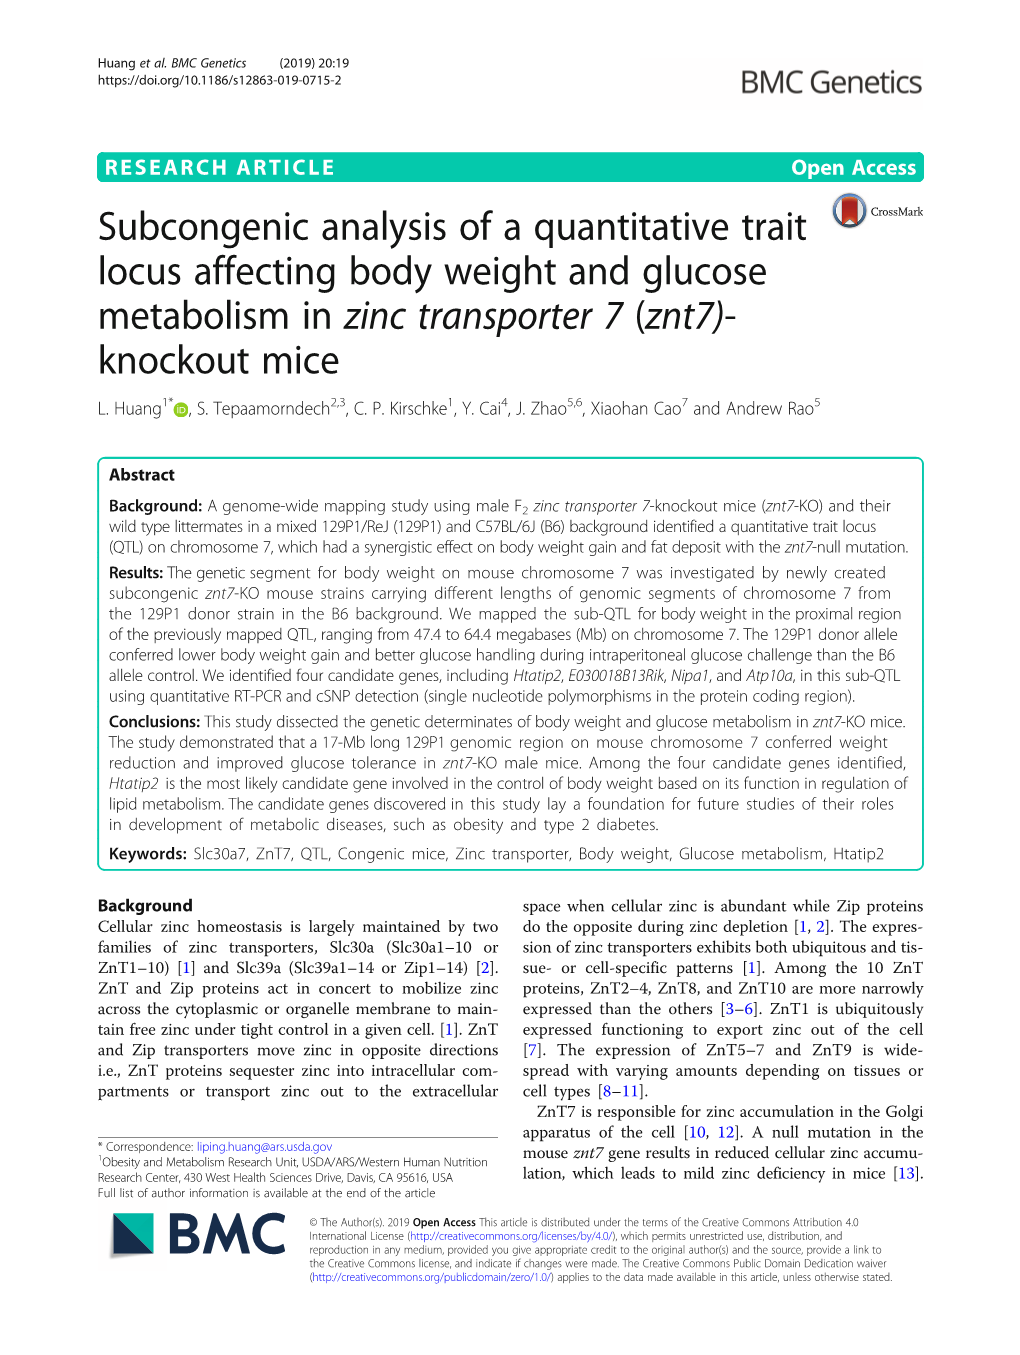 Subcongenic Analysis of a Quantitative Trait Locus Affecting Body Weight and Glucose Metabolism in Zinc Transporter 7 (Znt7)- Knockout Mice L